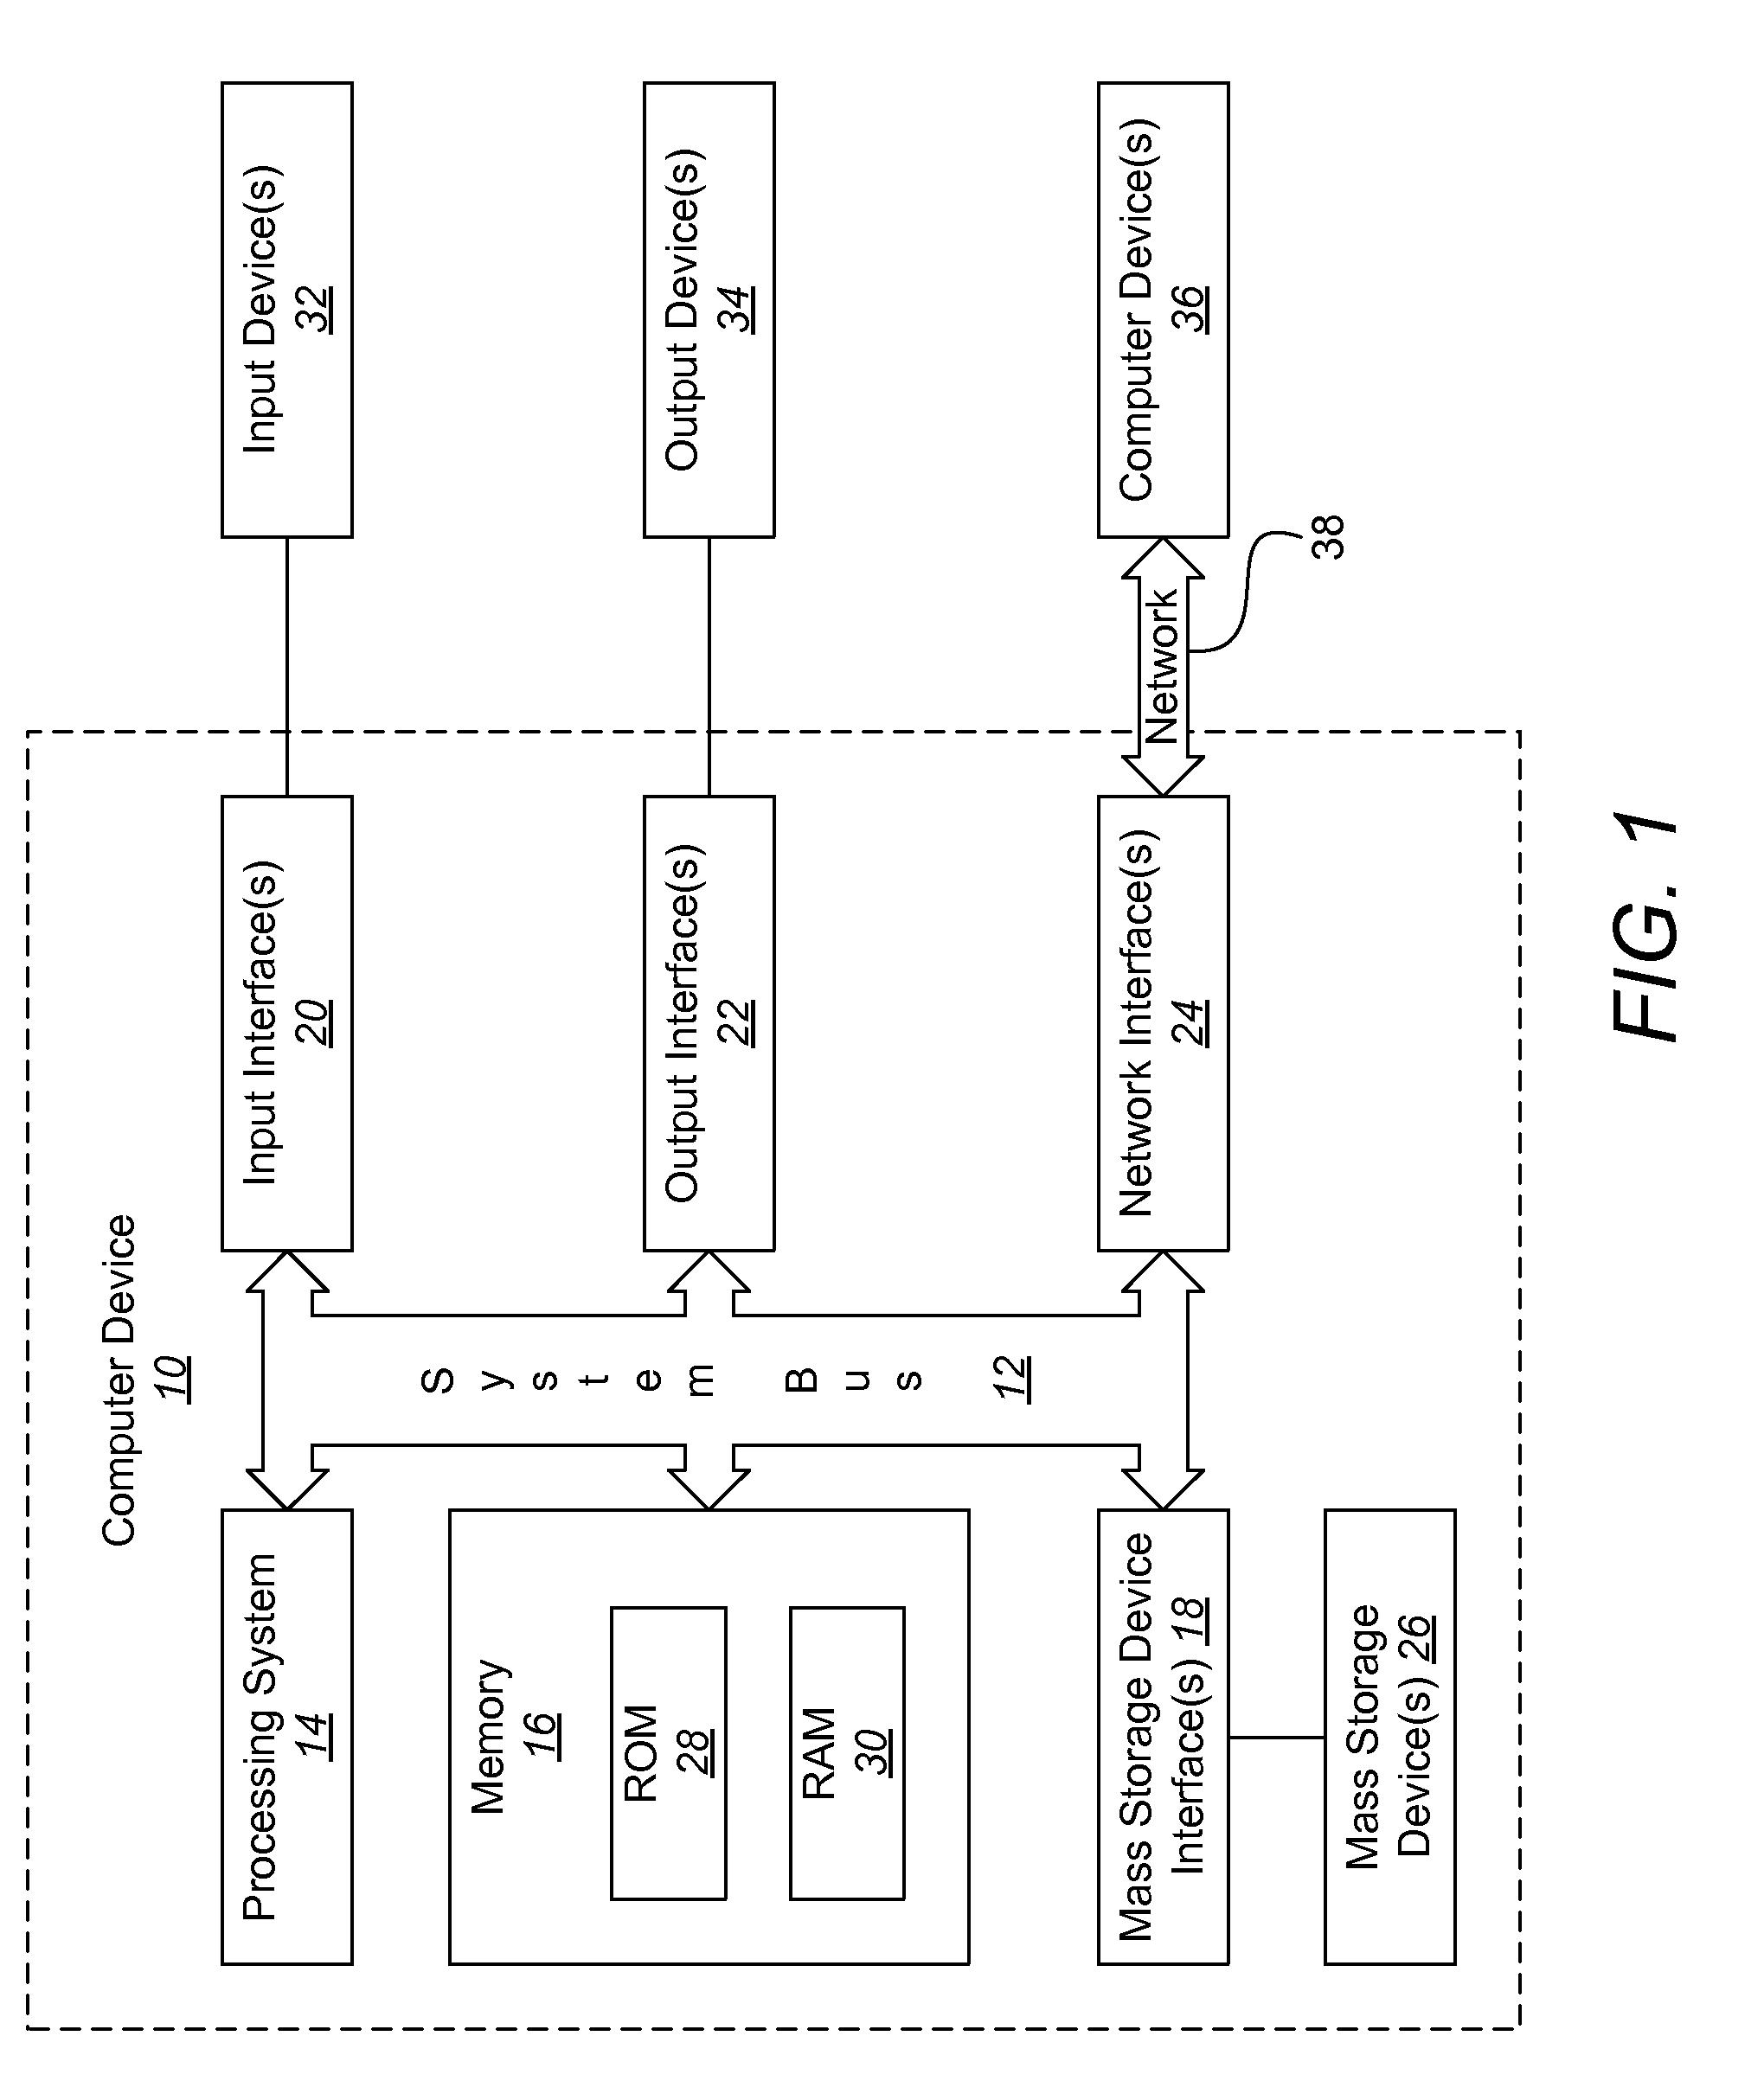 Systems and Methods for Providing Access to Various Files Across a Network